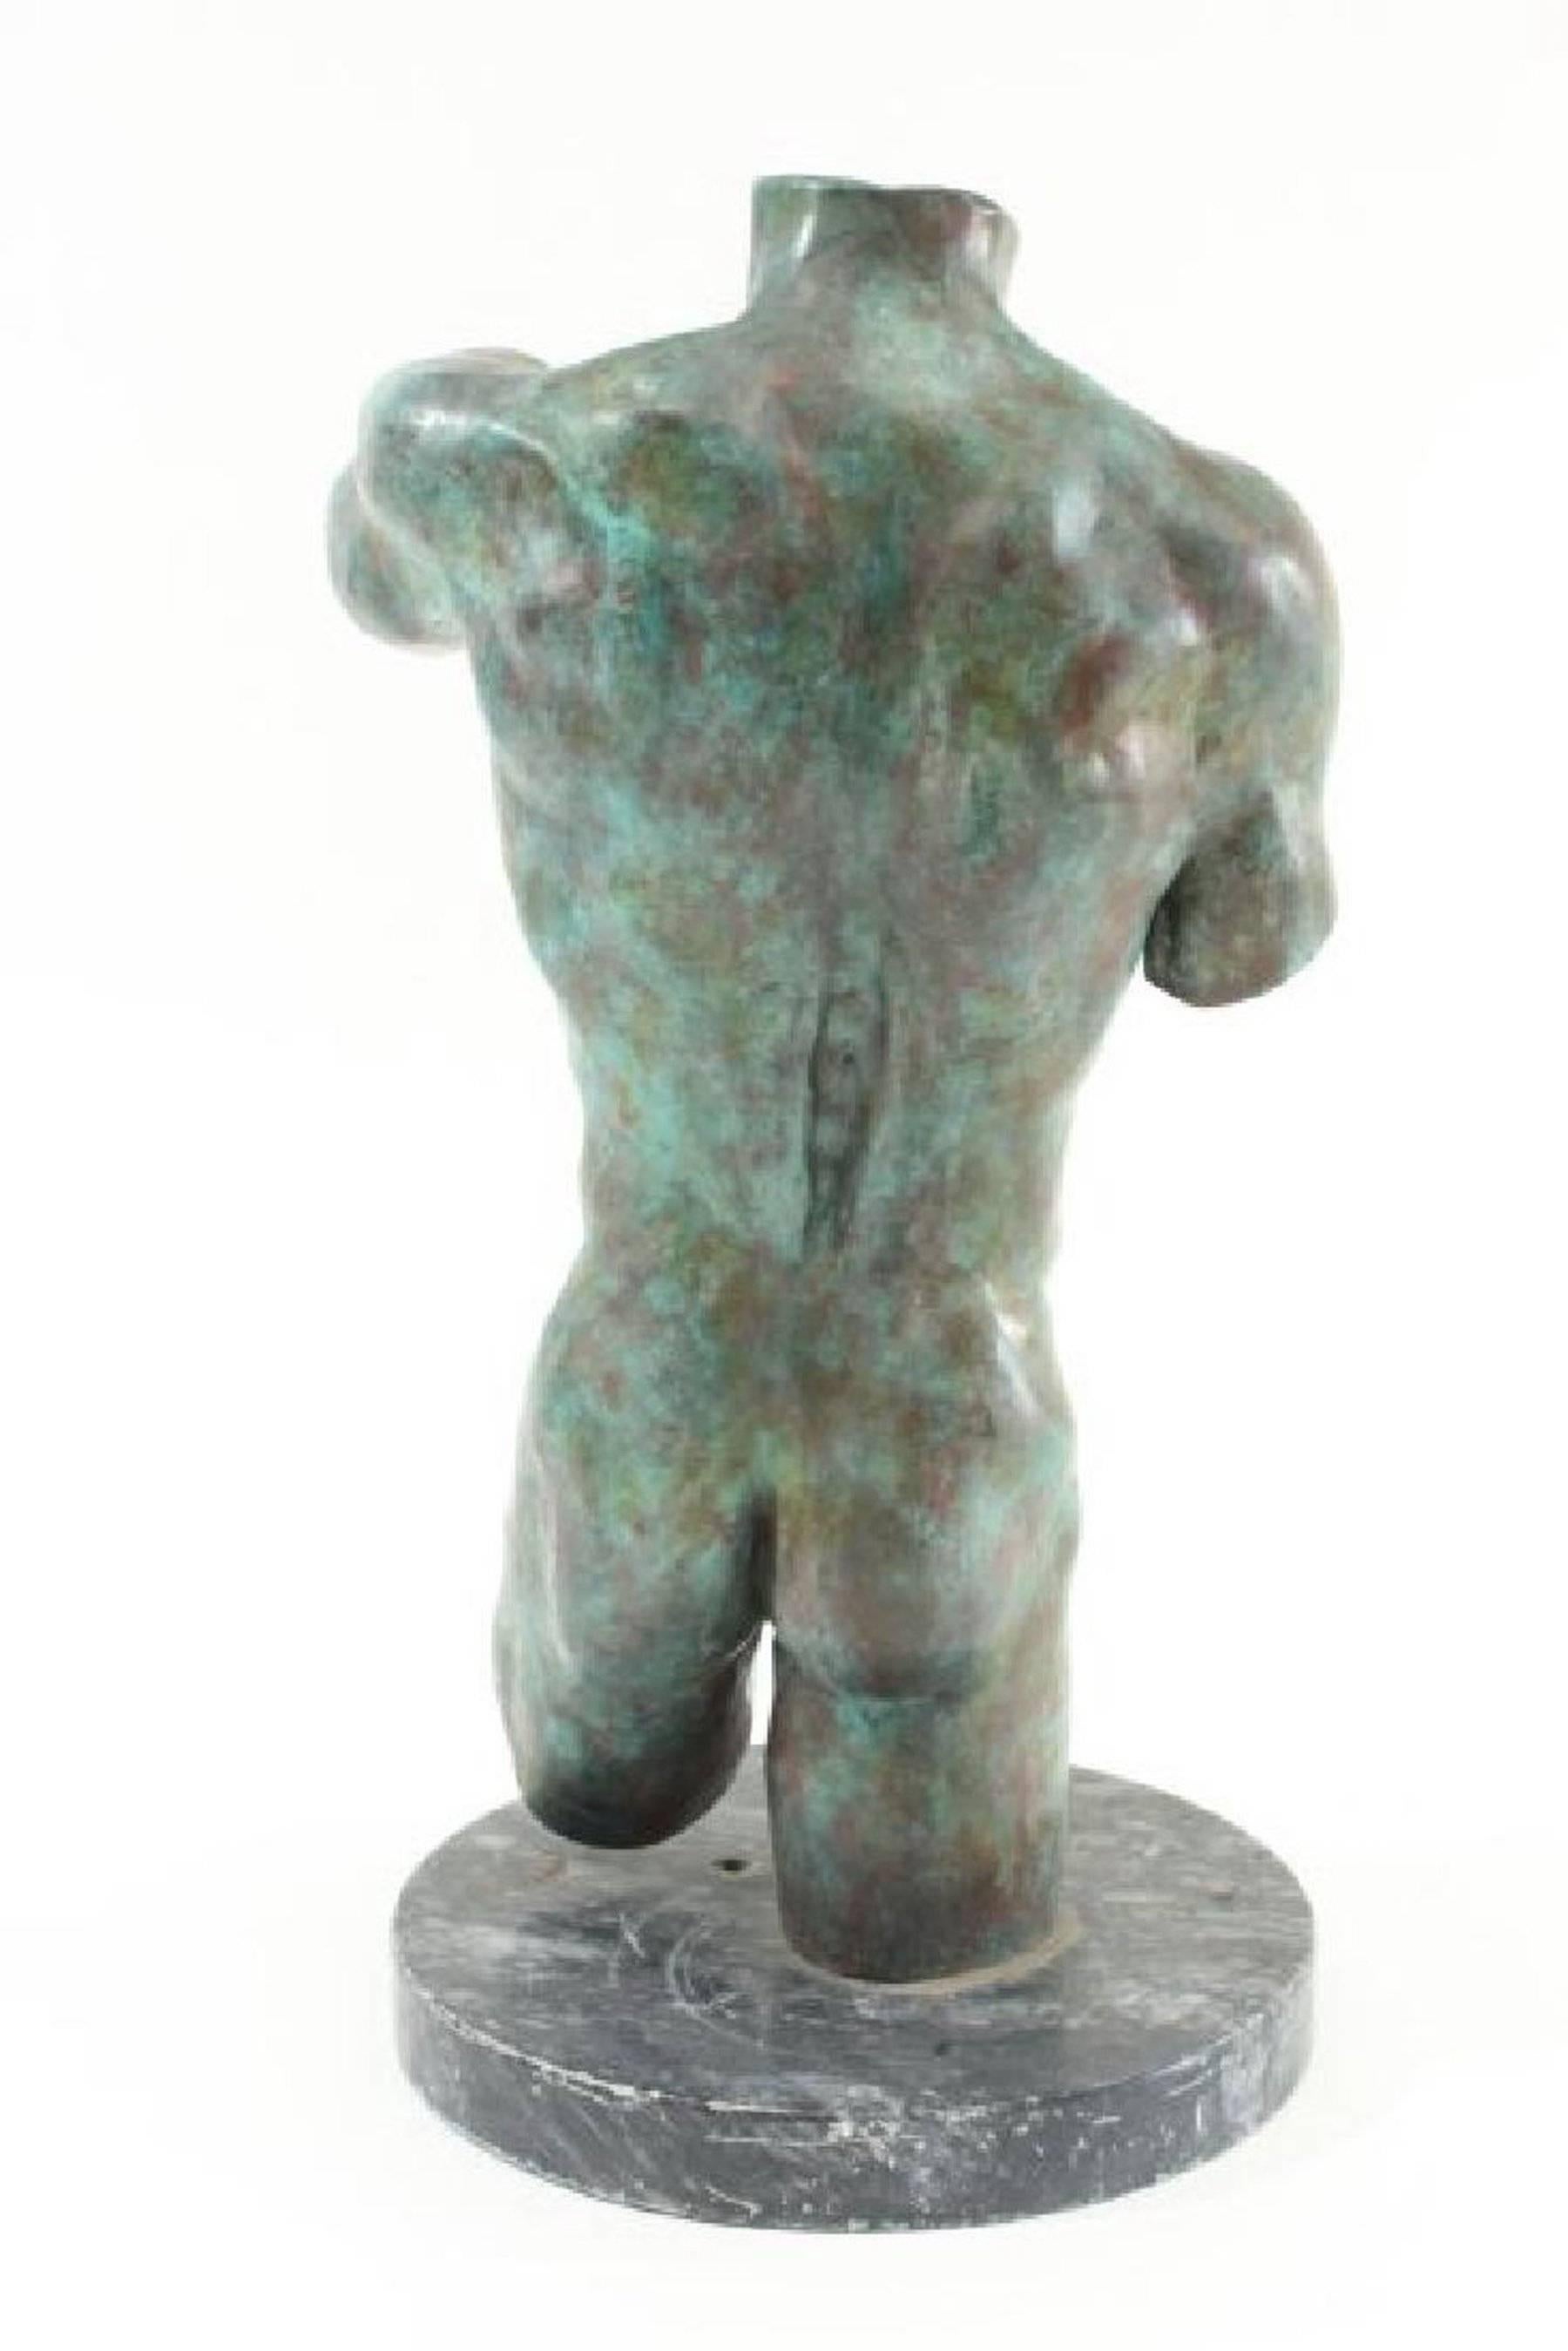 John H. Jones, male nude study, in verdigris bronze on a marble solace, copyrighted and signed.